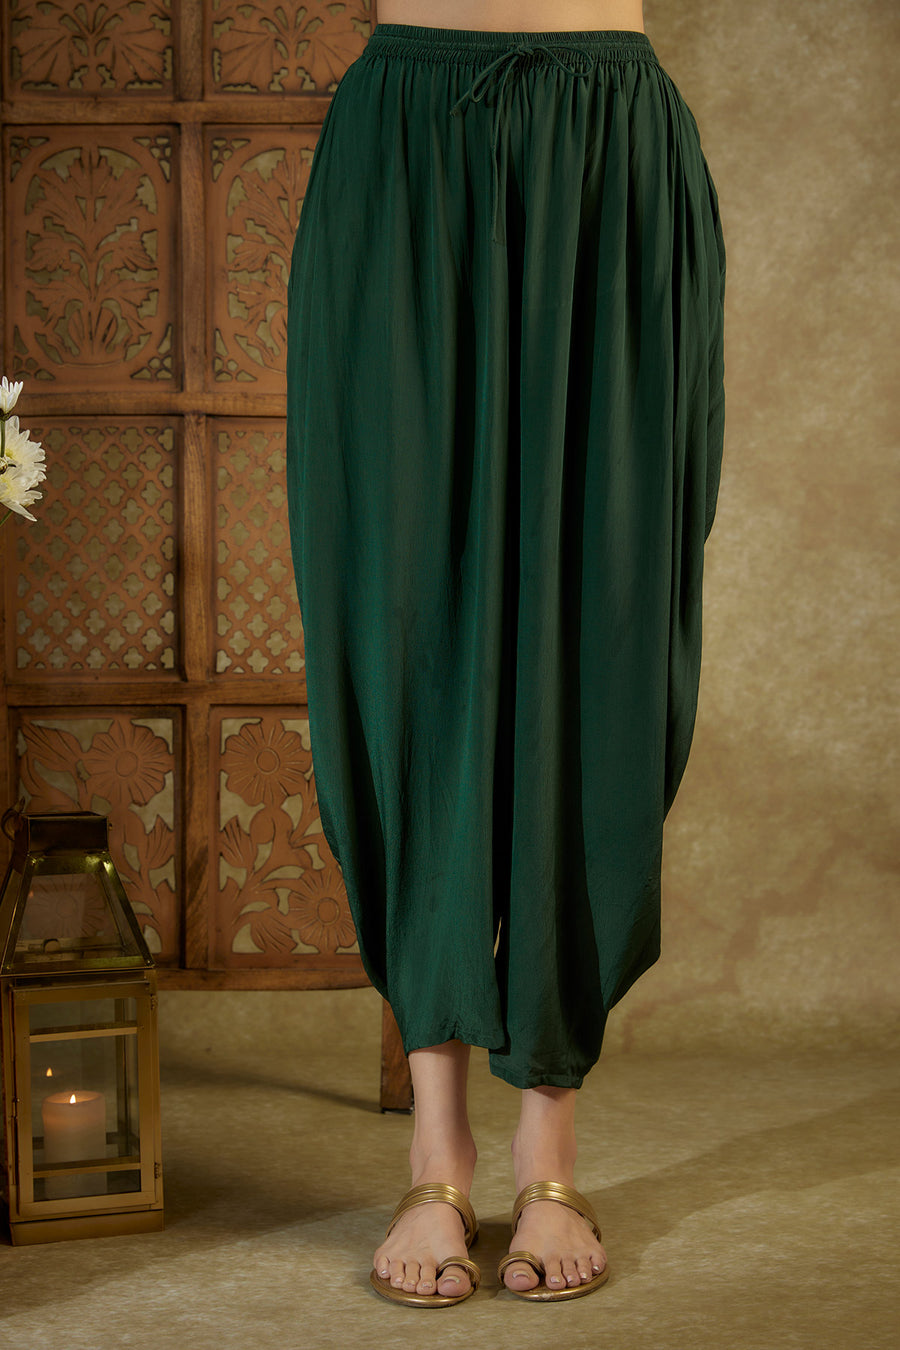 Forest green kaftan top, bustier and dhoti set